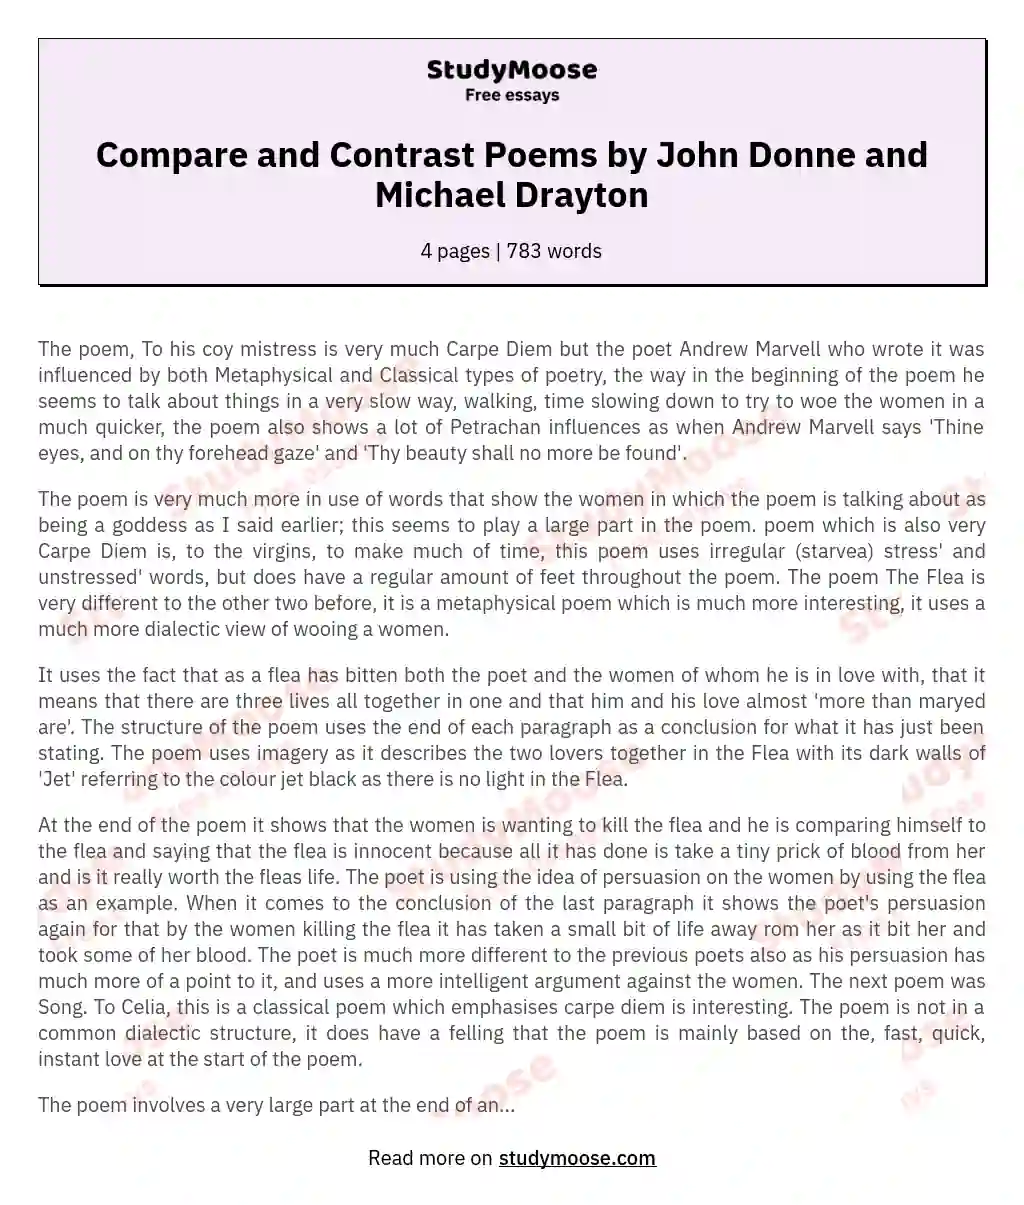 Compare and Contrast Poems by John Donne and Michael Drayton